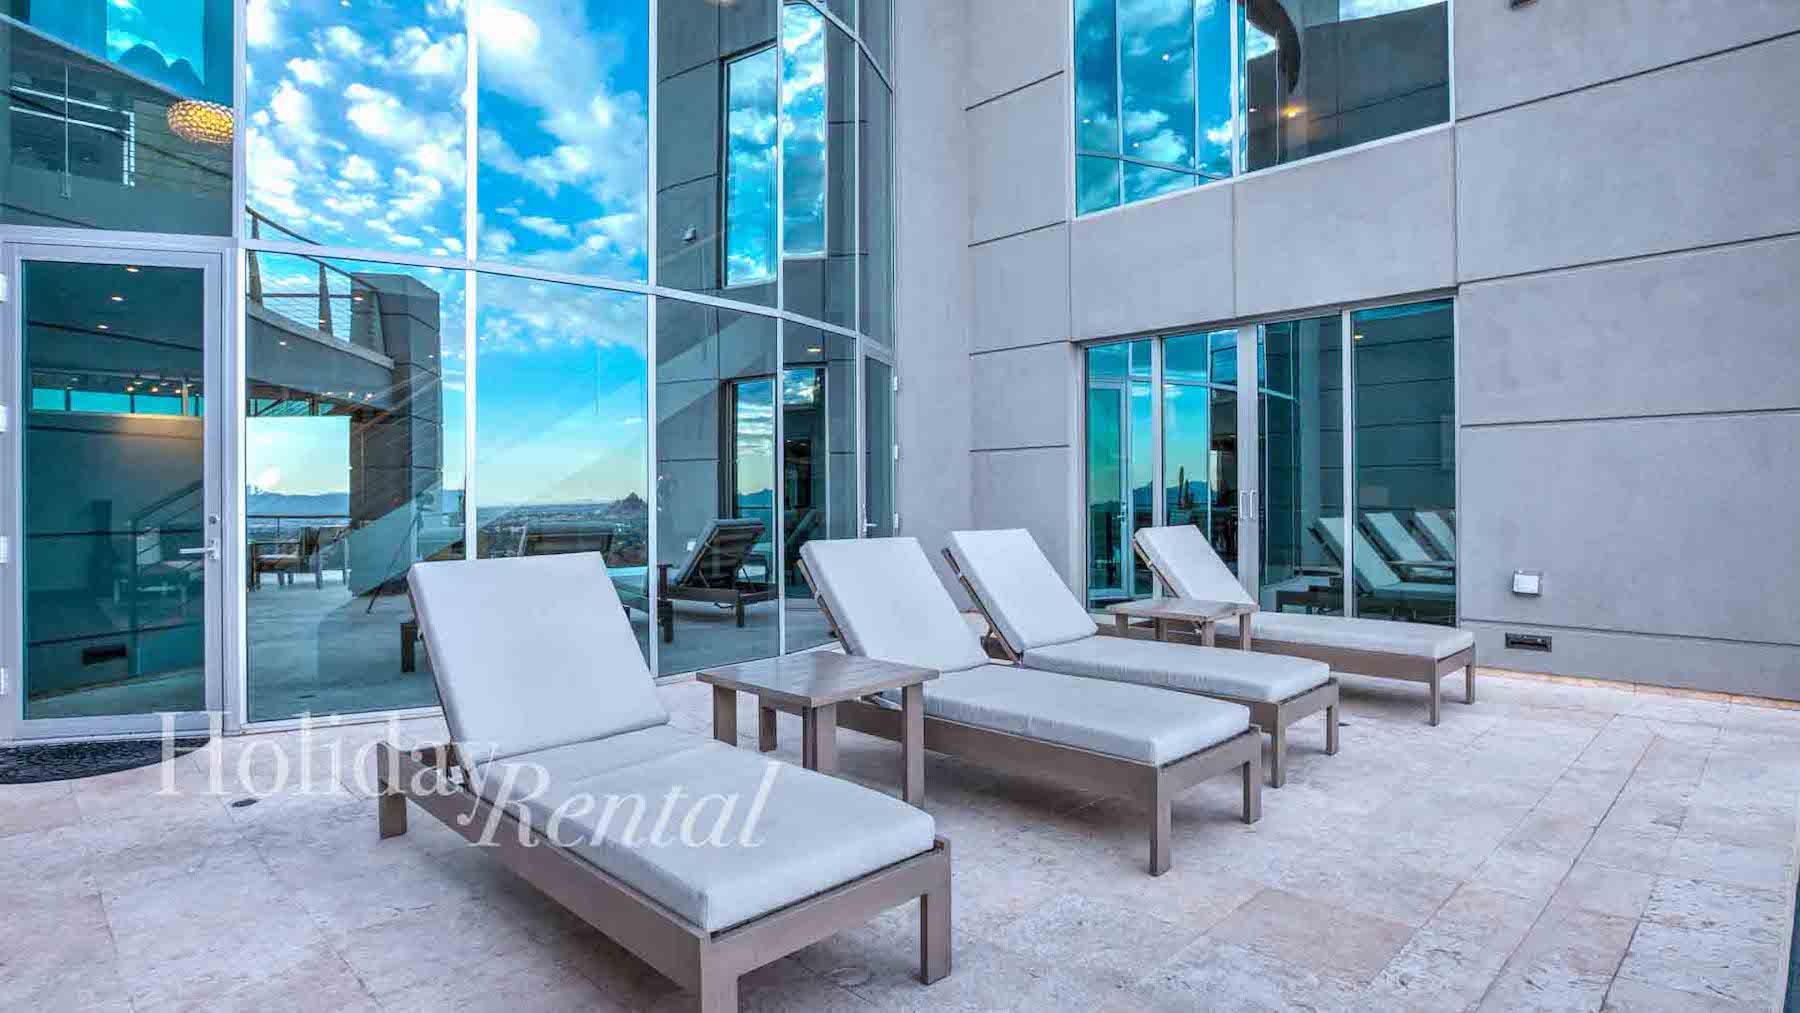 lounge chairs with a view luxury vacation rental